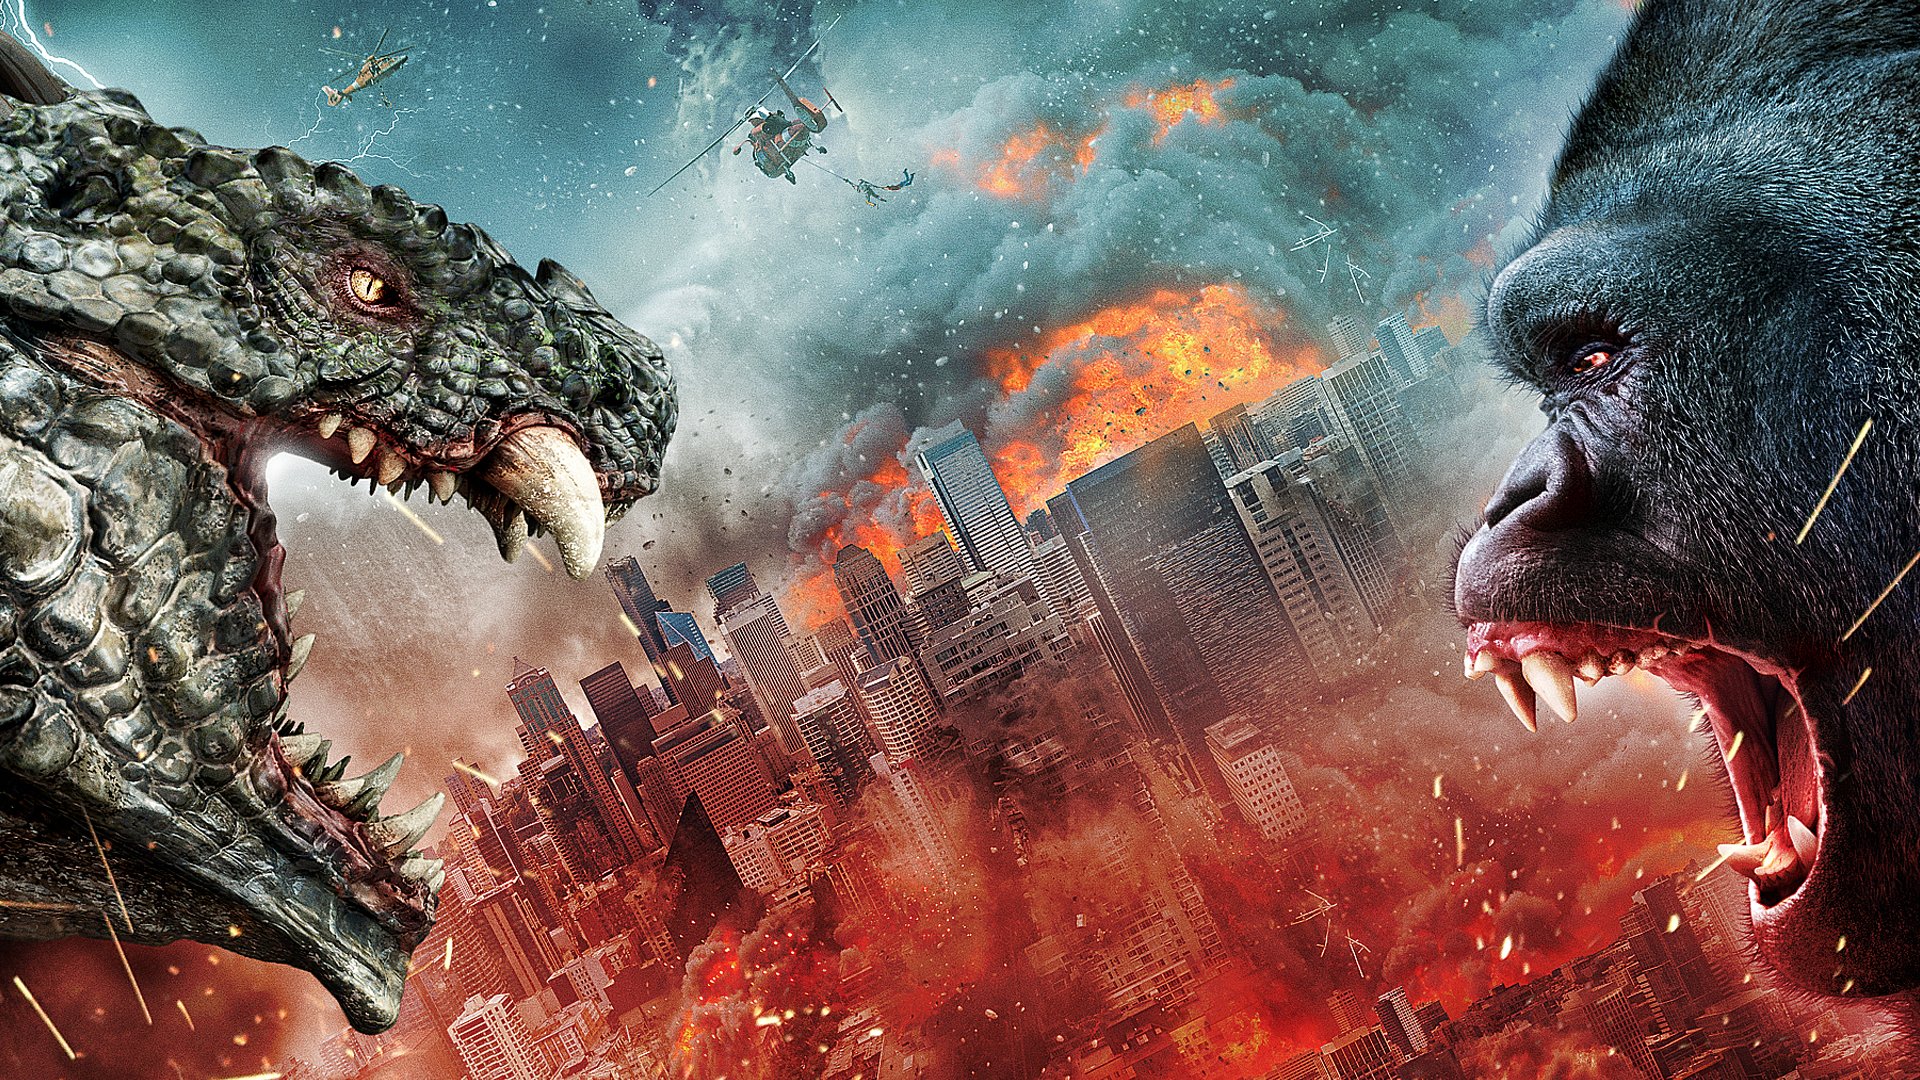 Godzilla vs. Kong' Gets a Low-Budget Kaiju Smackdown Mockbuster With 'Ape  vs. Monster' [Trailer] - Bloody Disgusting